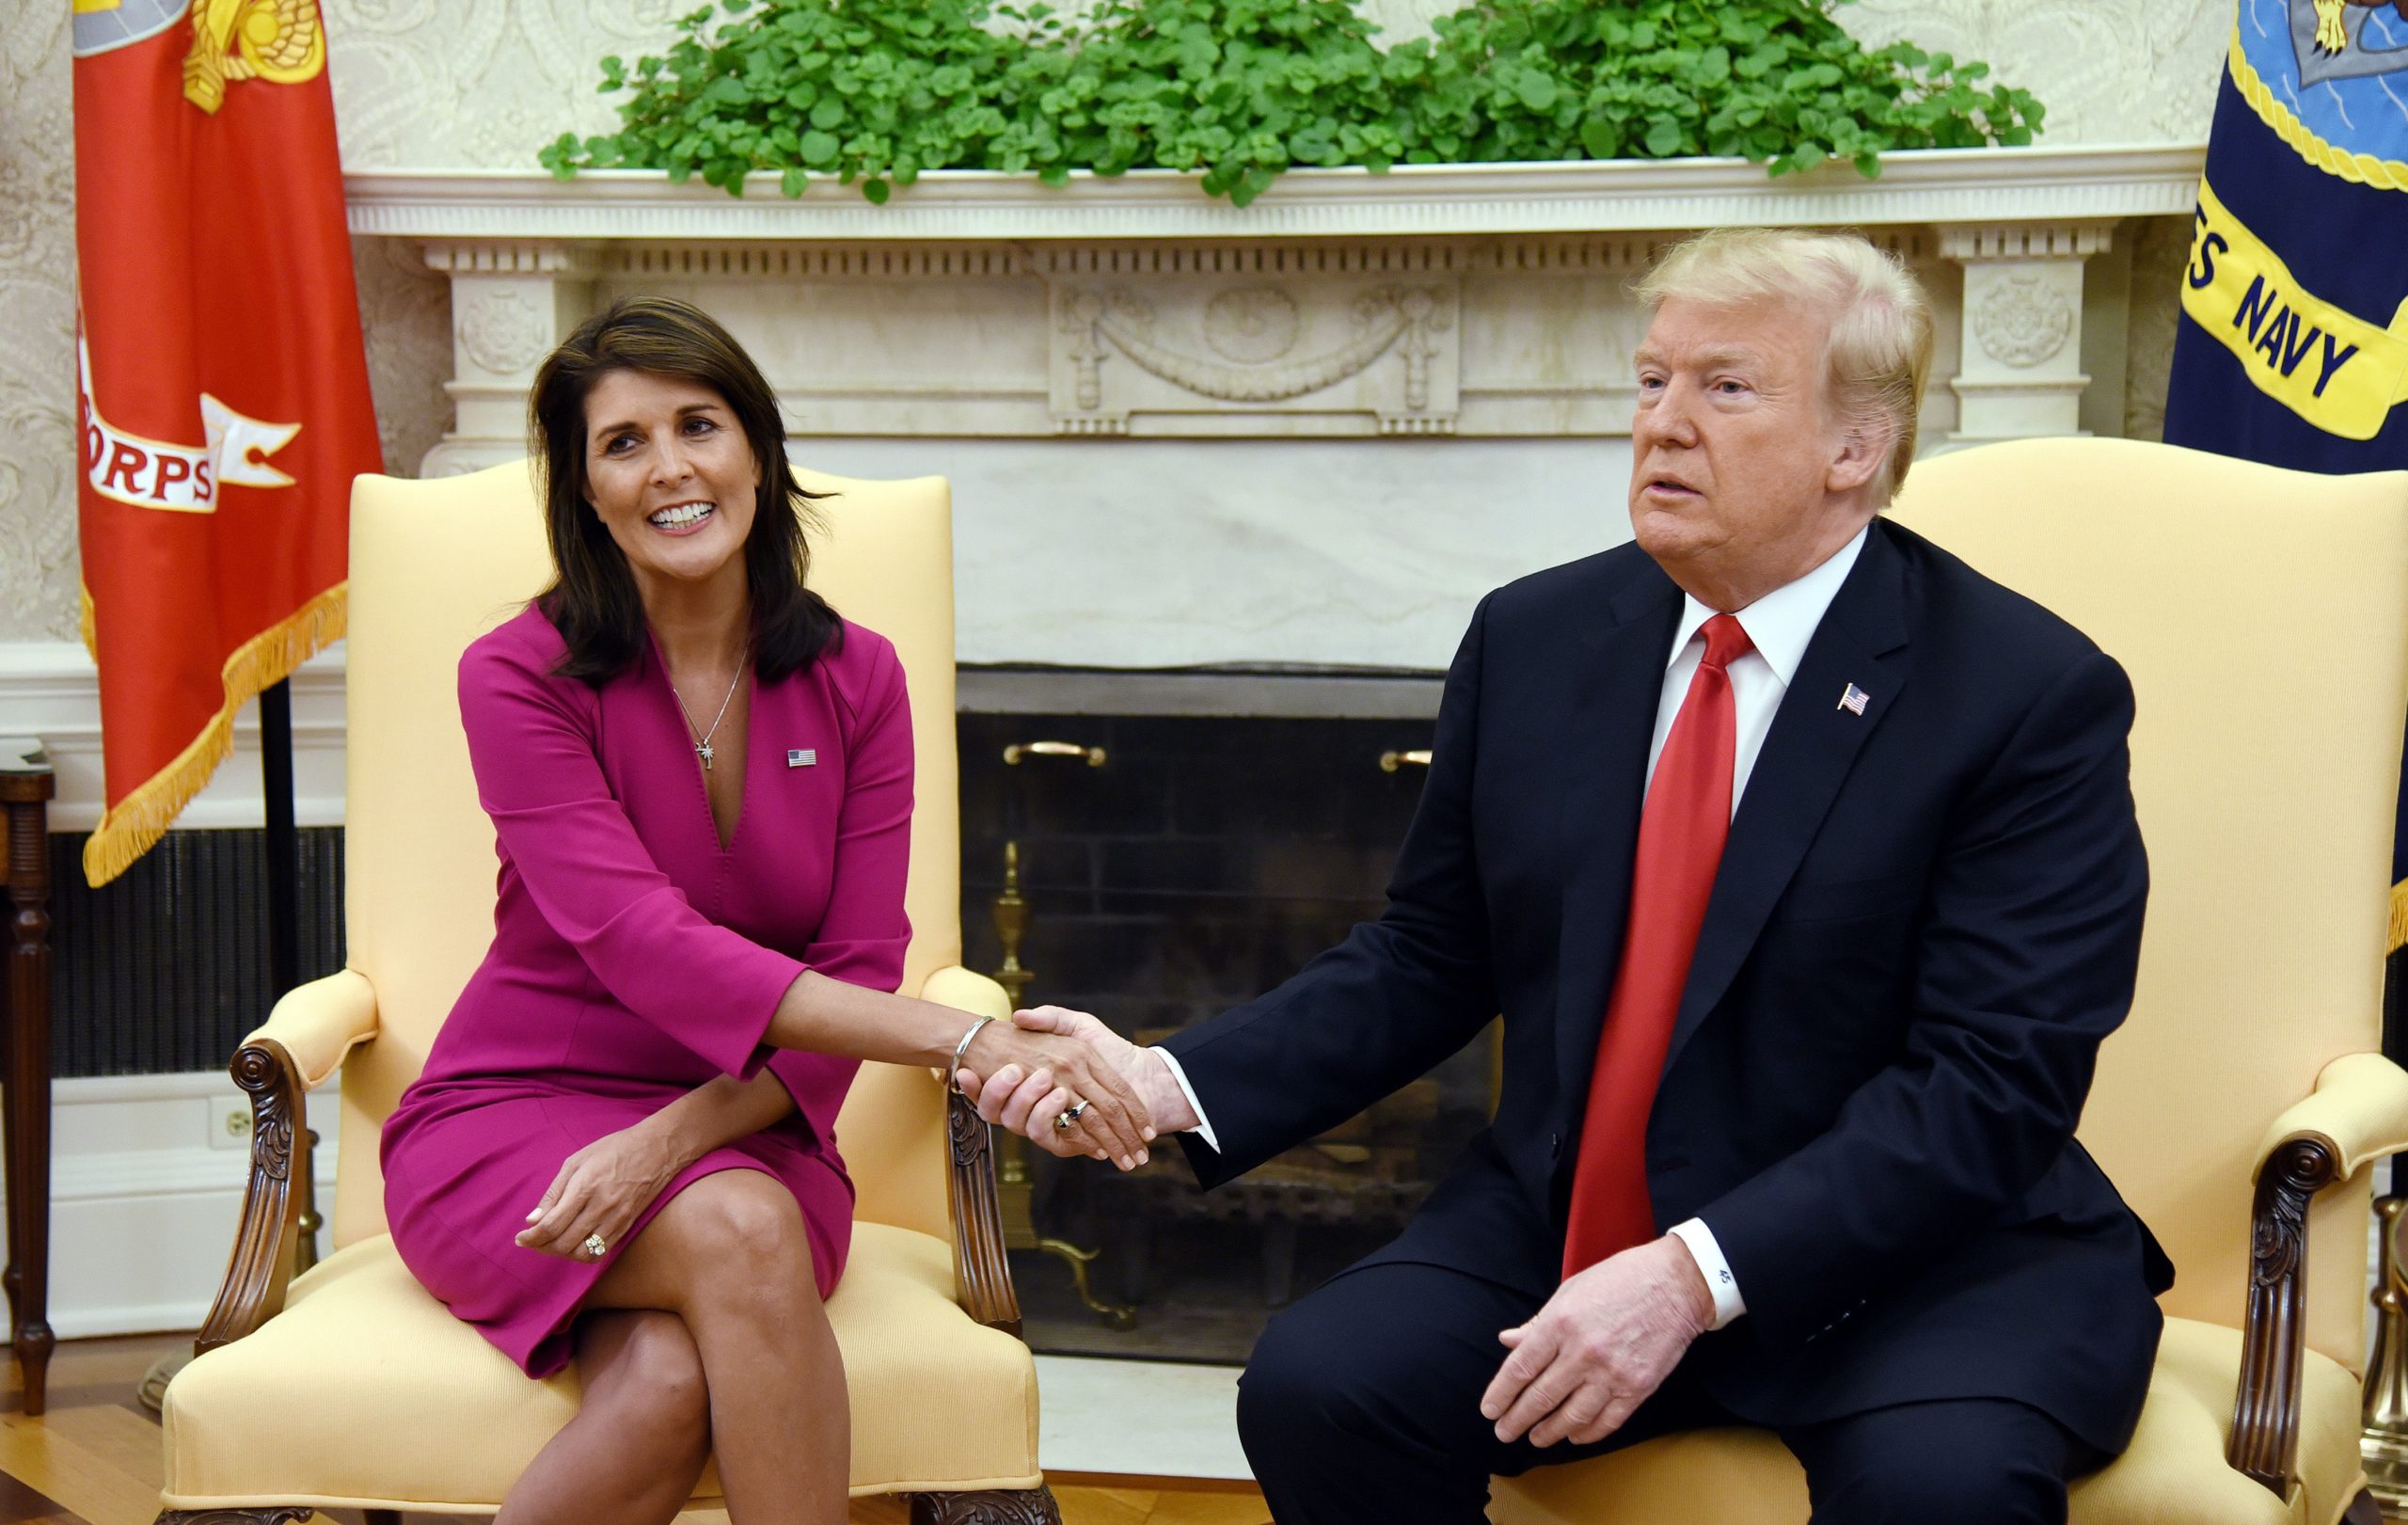 US President Donald Trump shakes hands with Nikki Haley, the United States Ambassador to the United Nations in the Oval office of the White House on October 9, 2018 in Washington, DC. (Photo by OLIVIER DOULIERY/AFP via Getty Images)